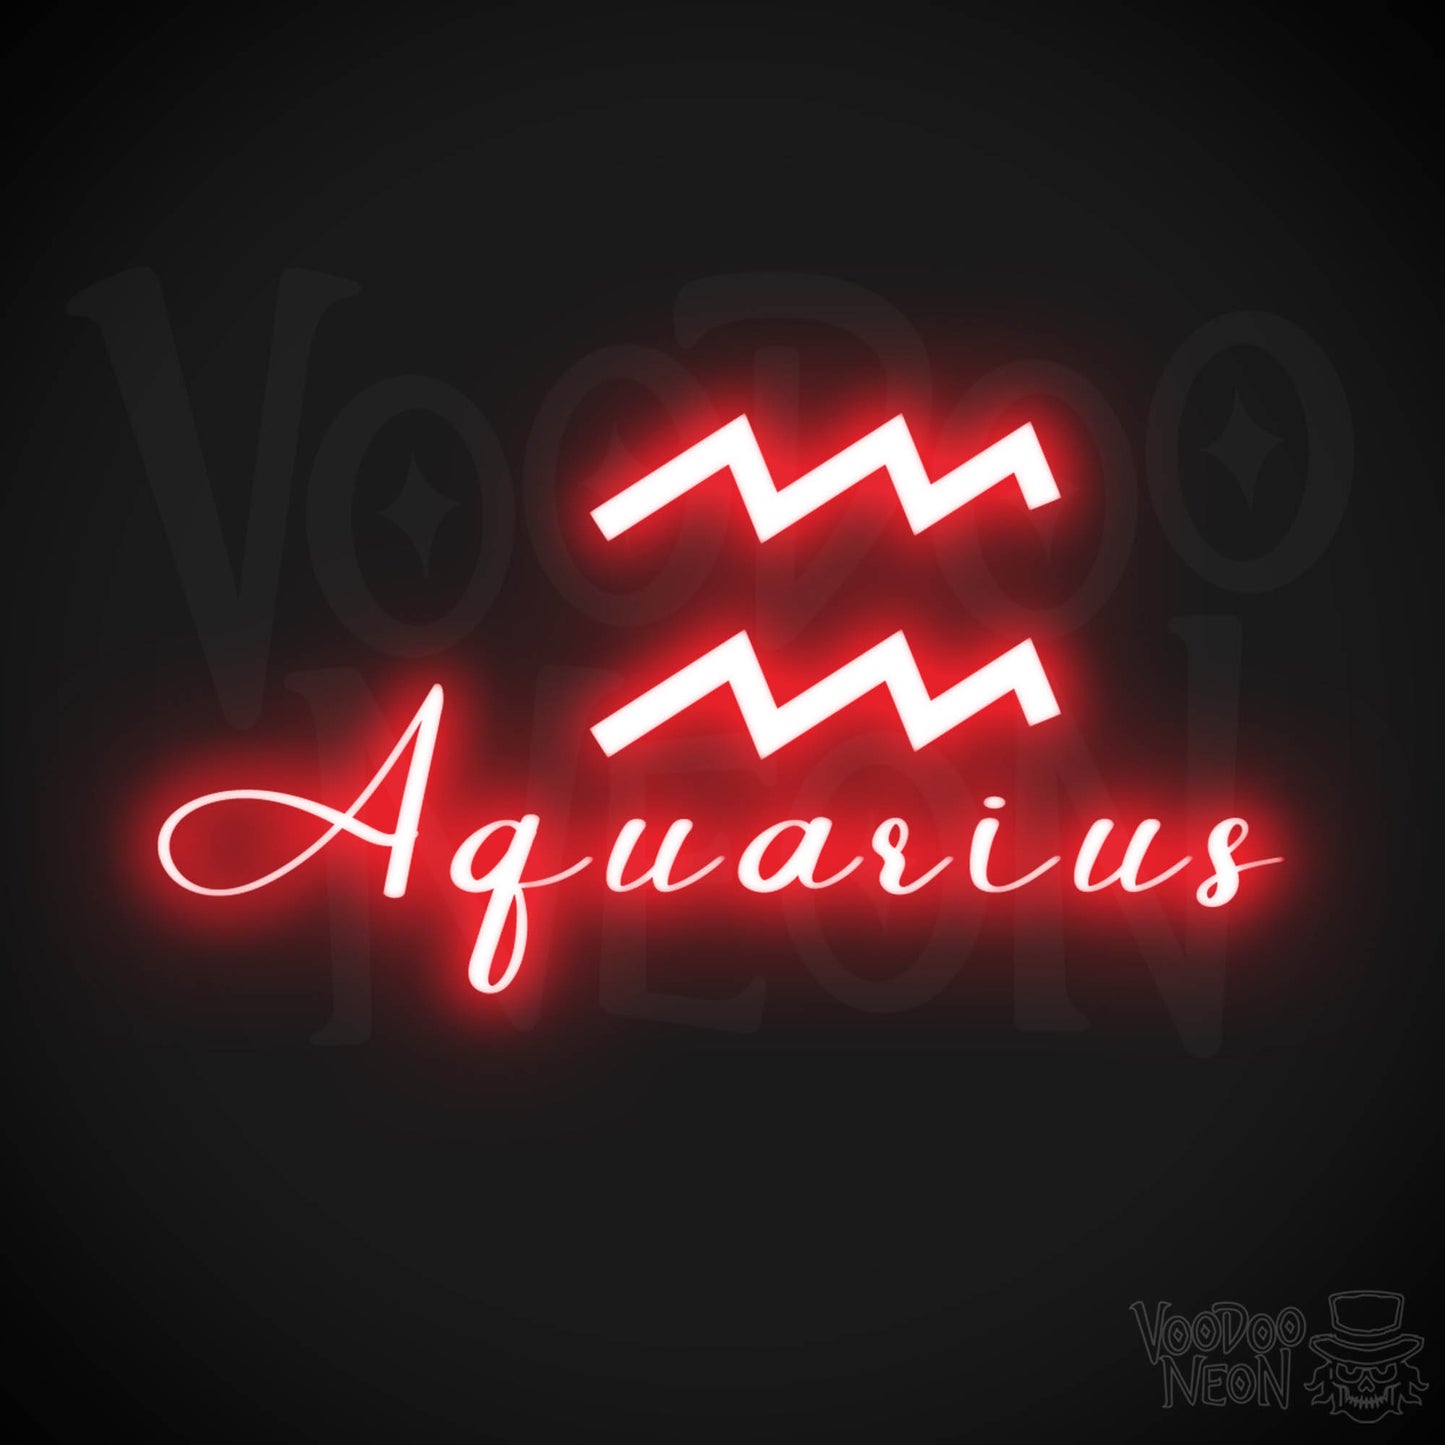 Aquarius Neon Sign - Neon Aquarius Sign - Aquarius Symbol - Neon Wall Art - Color Red